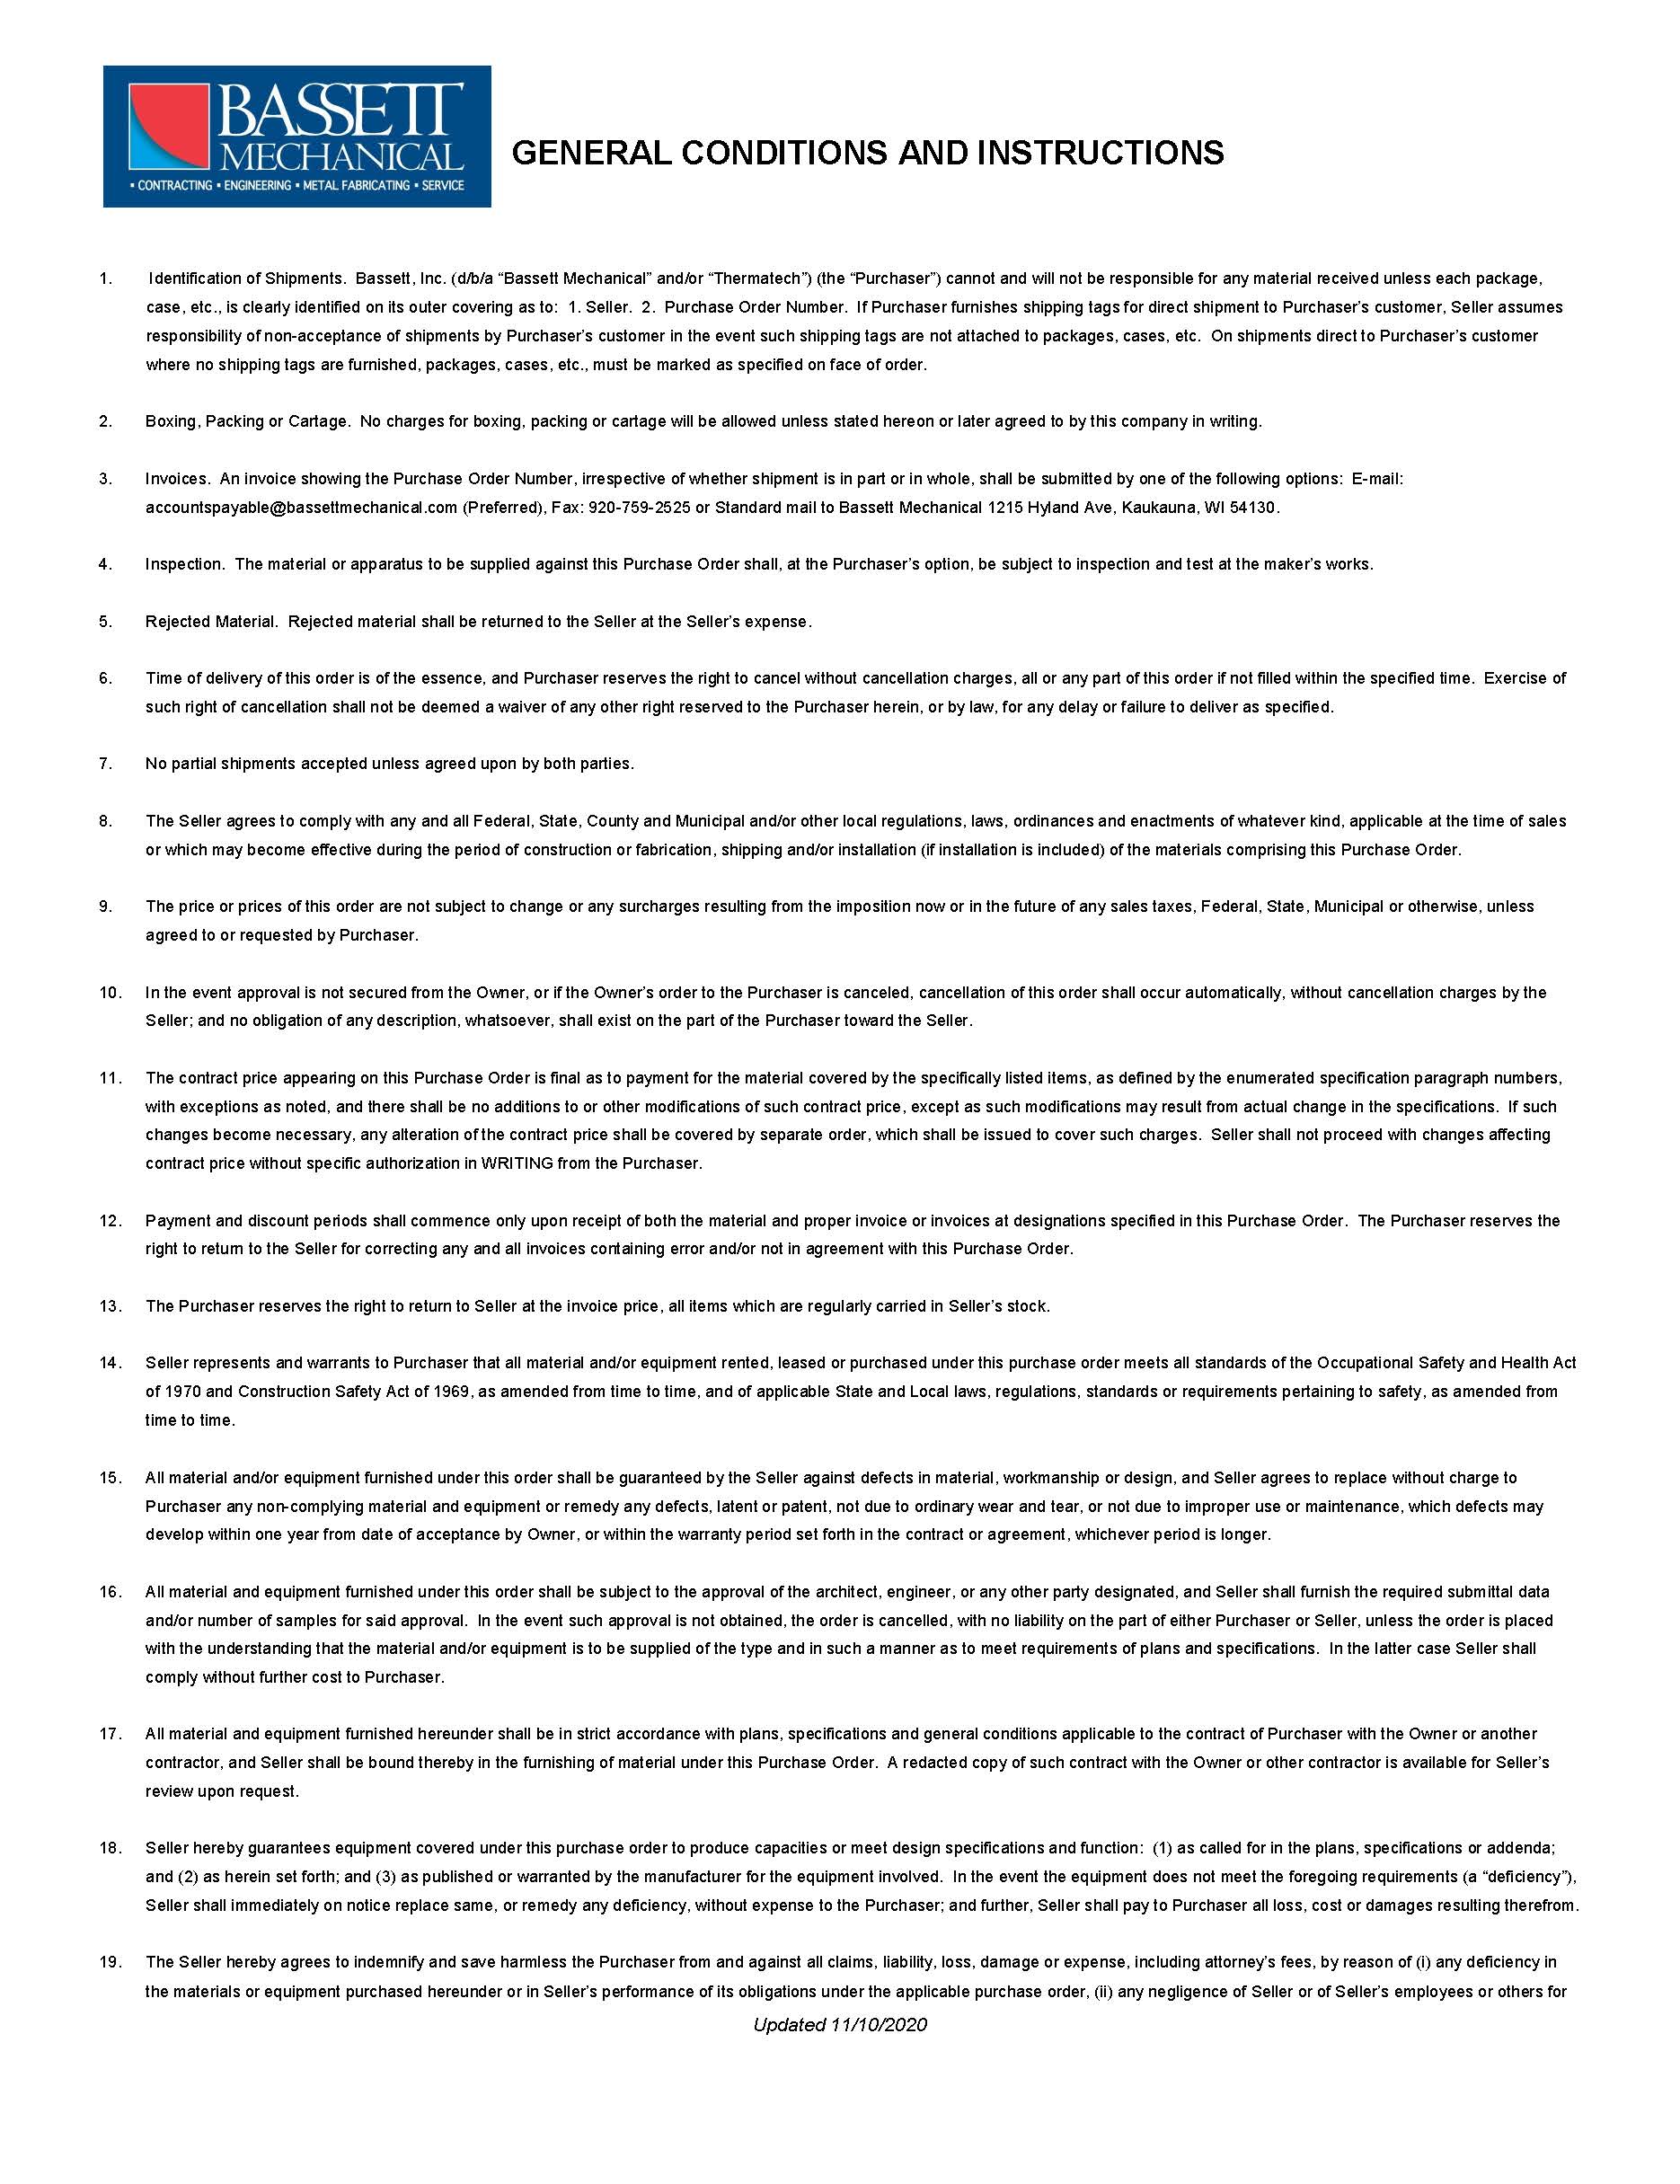 Bassett Mechanical Terms and Conditions Page 1